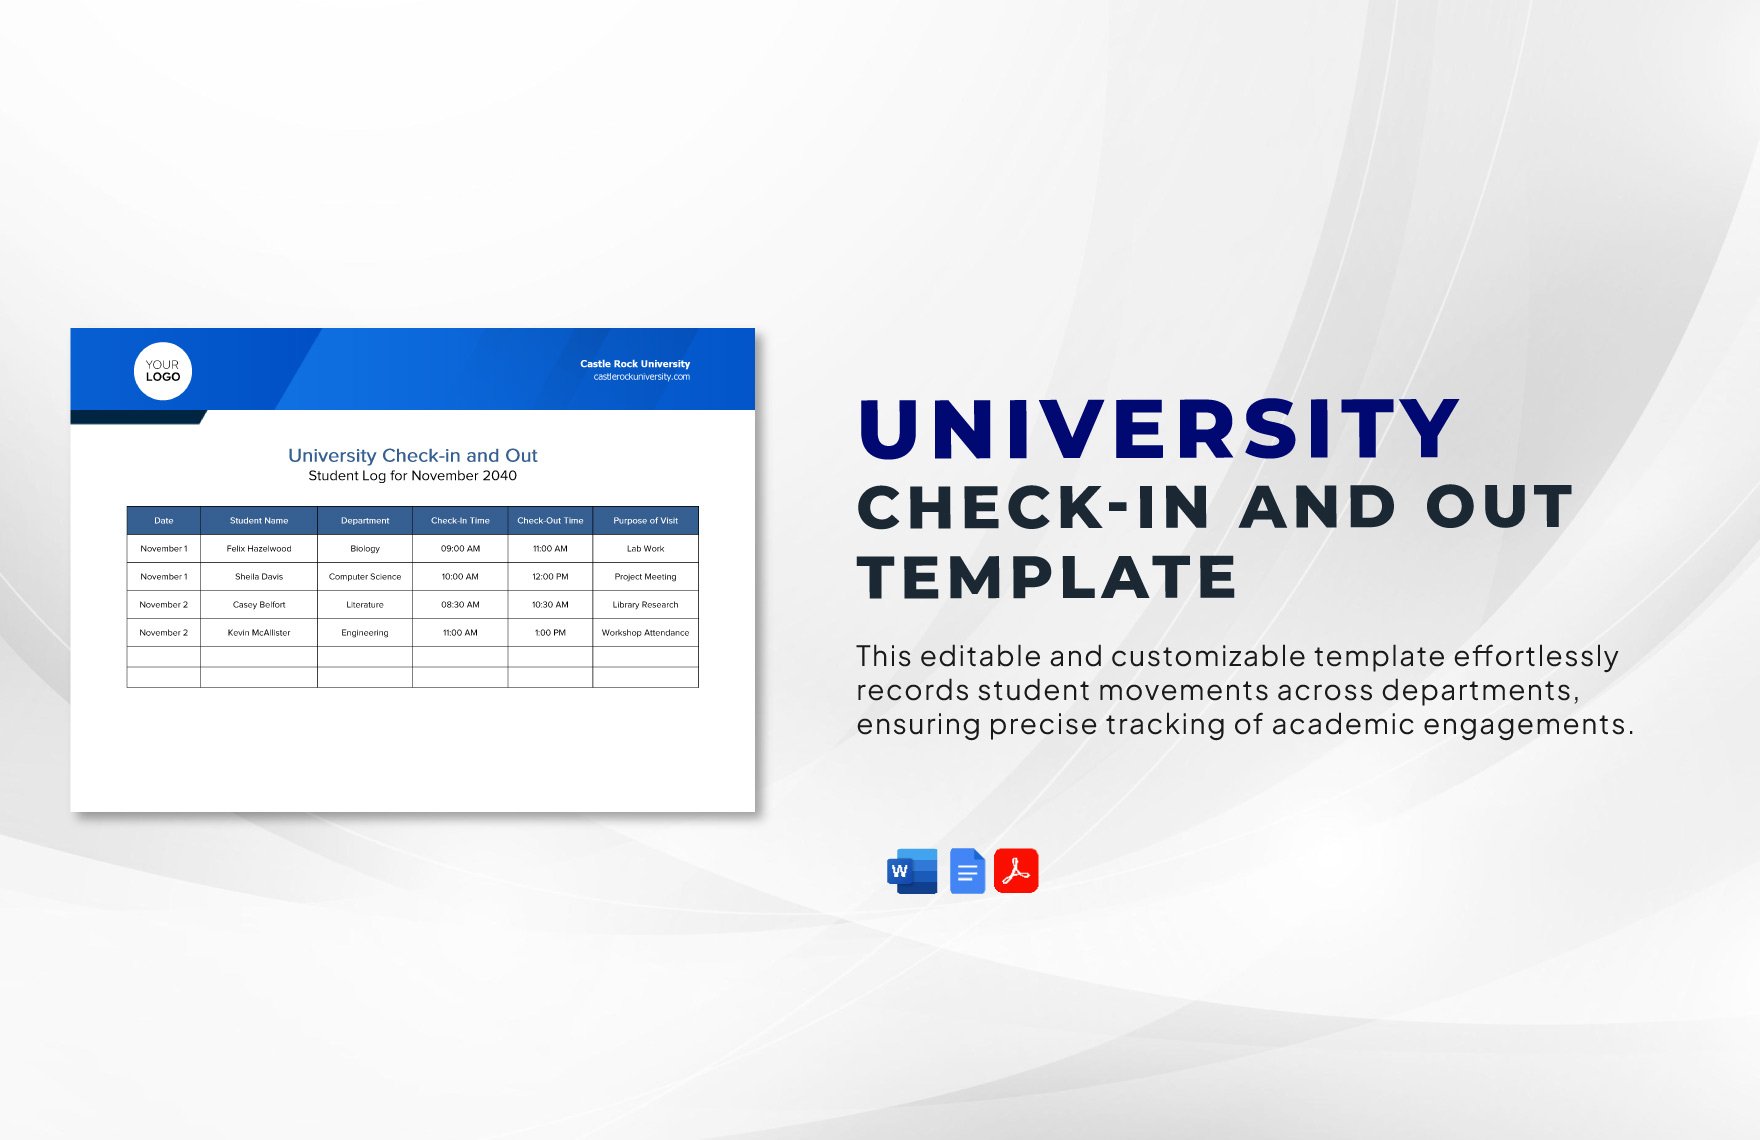 University Check-in and Out Template